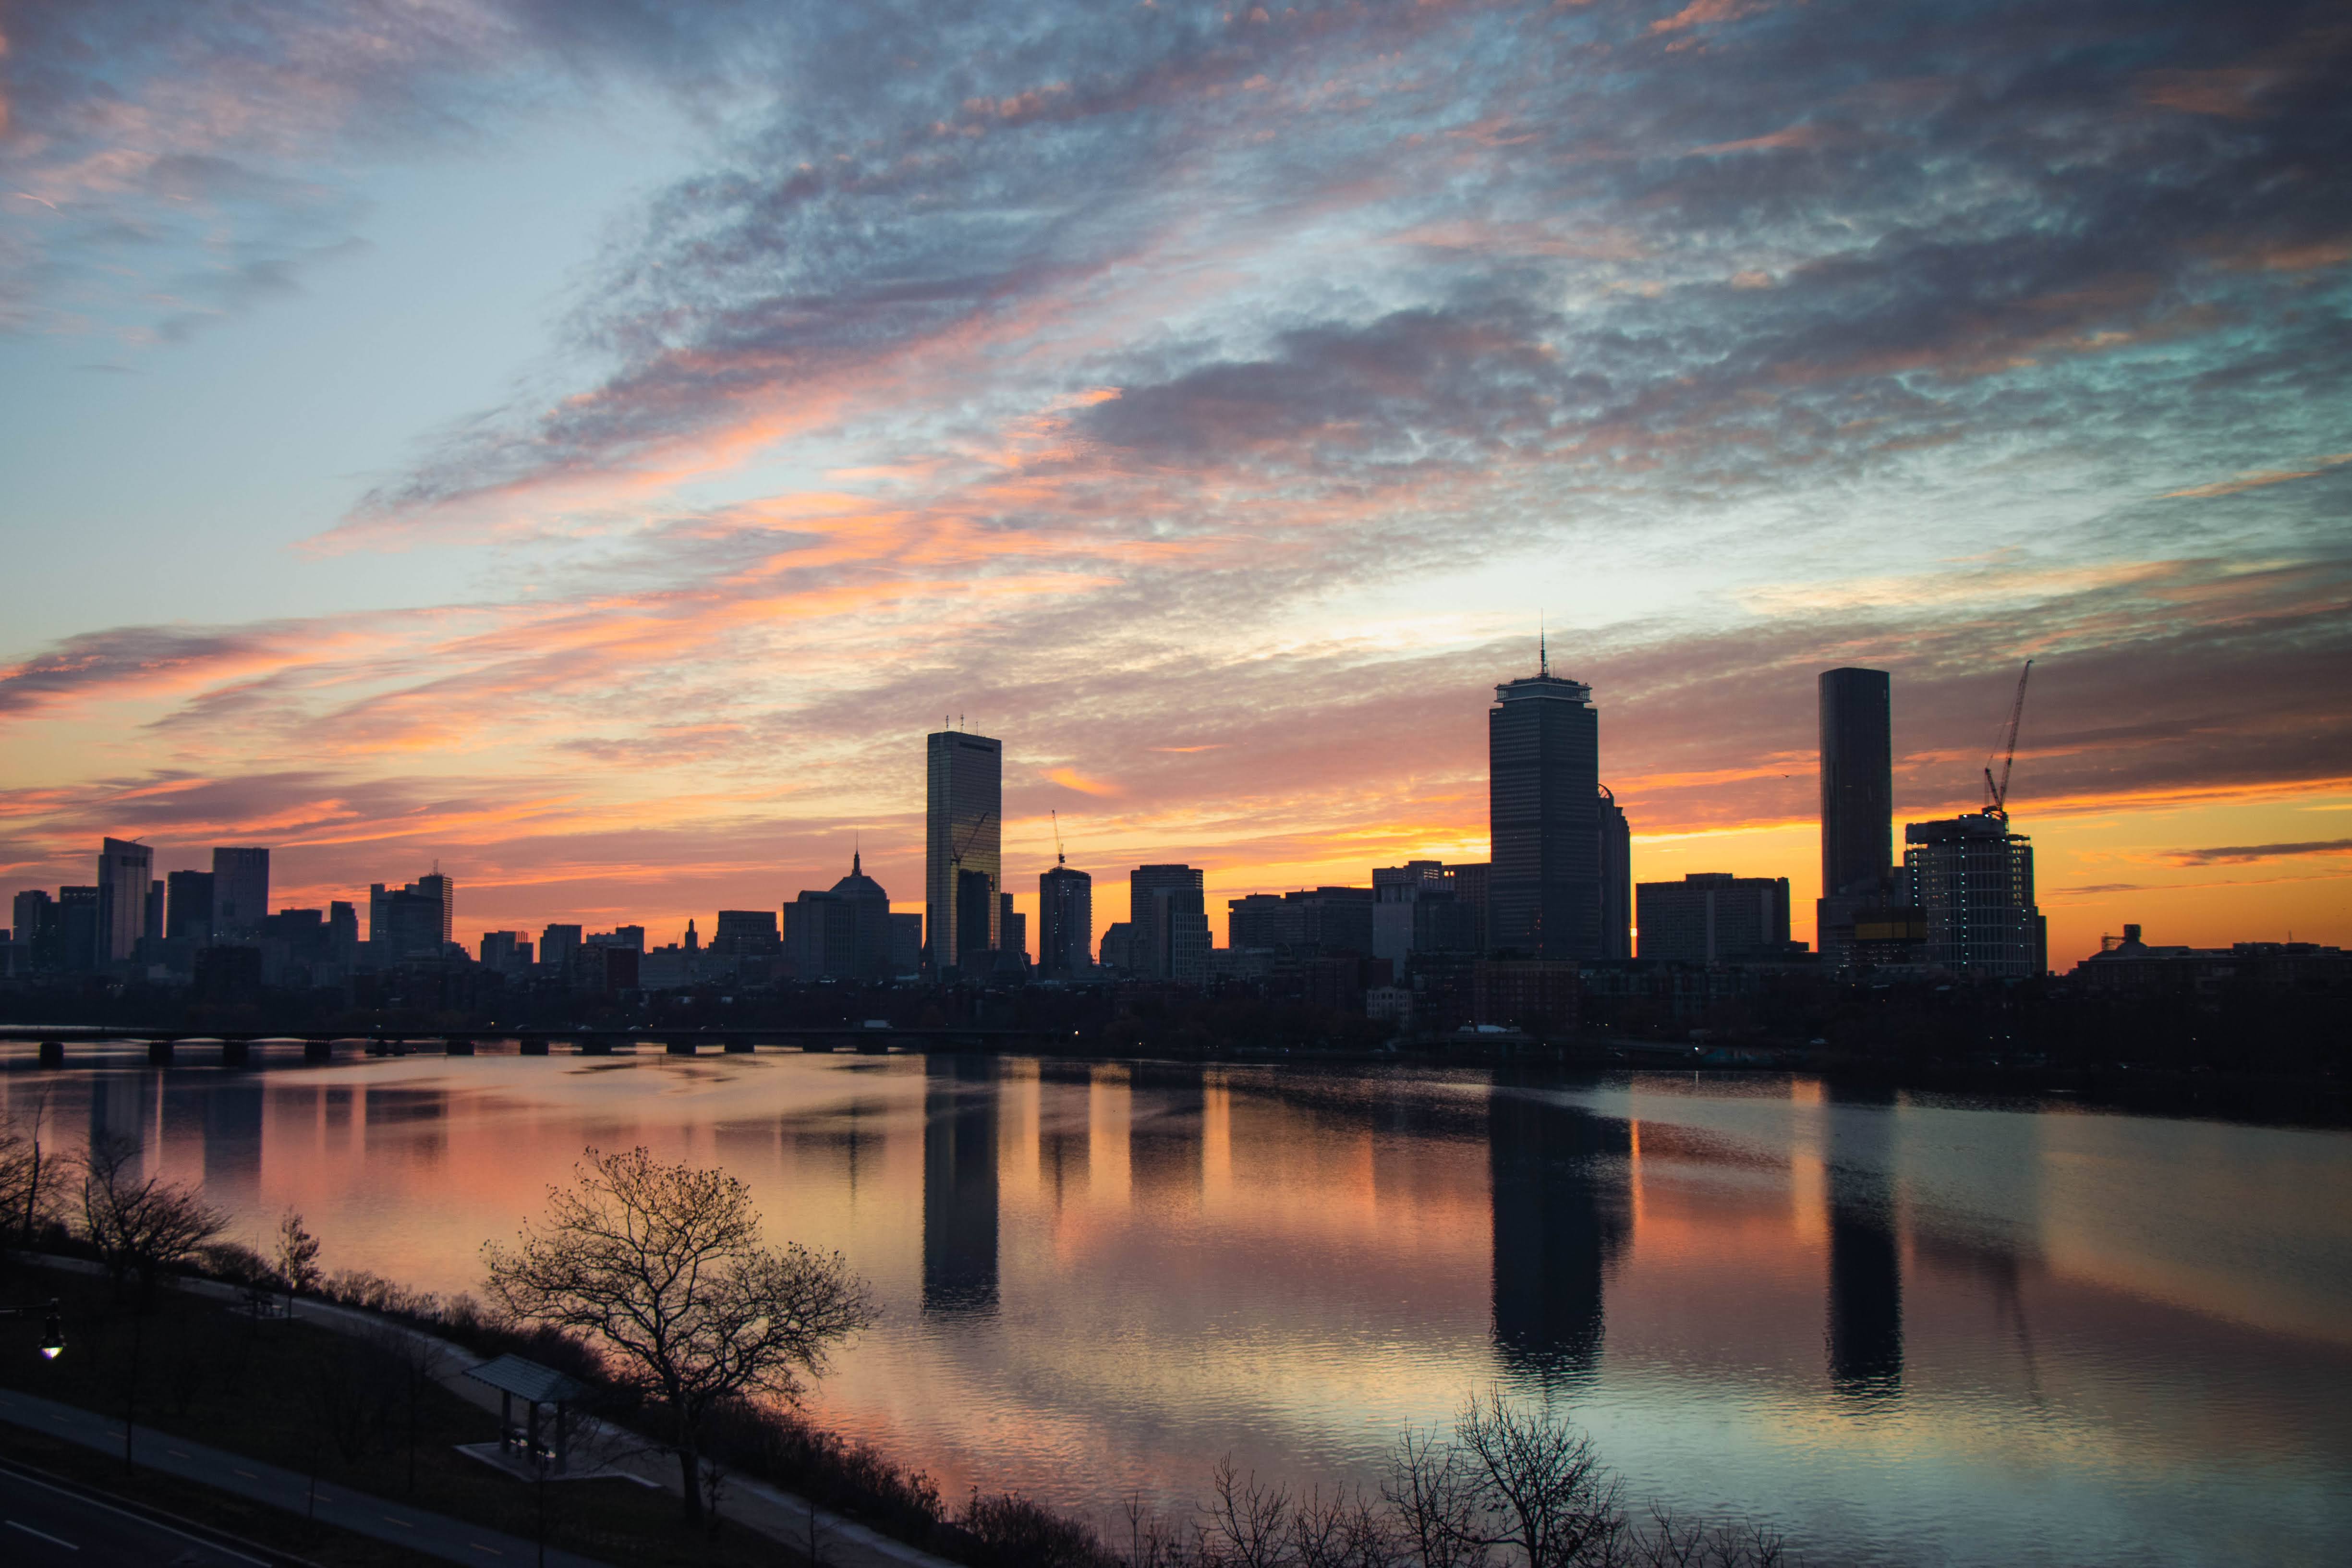 Sunrise over the charles river